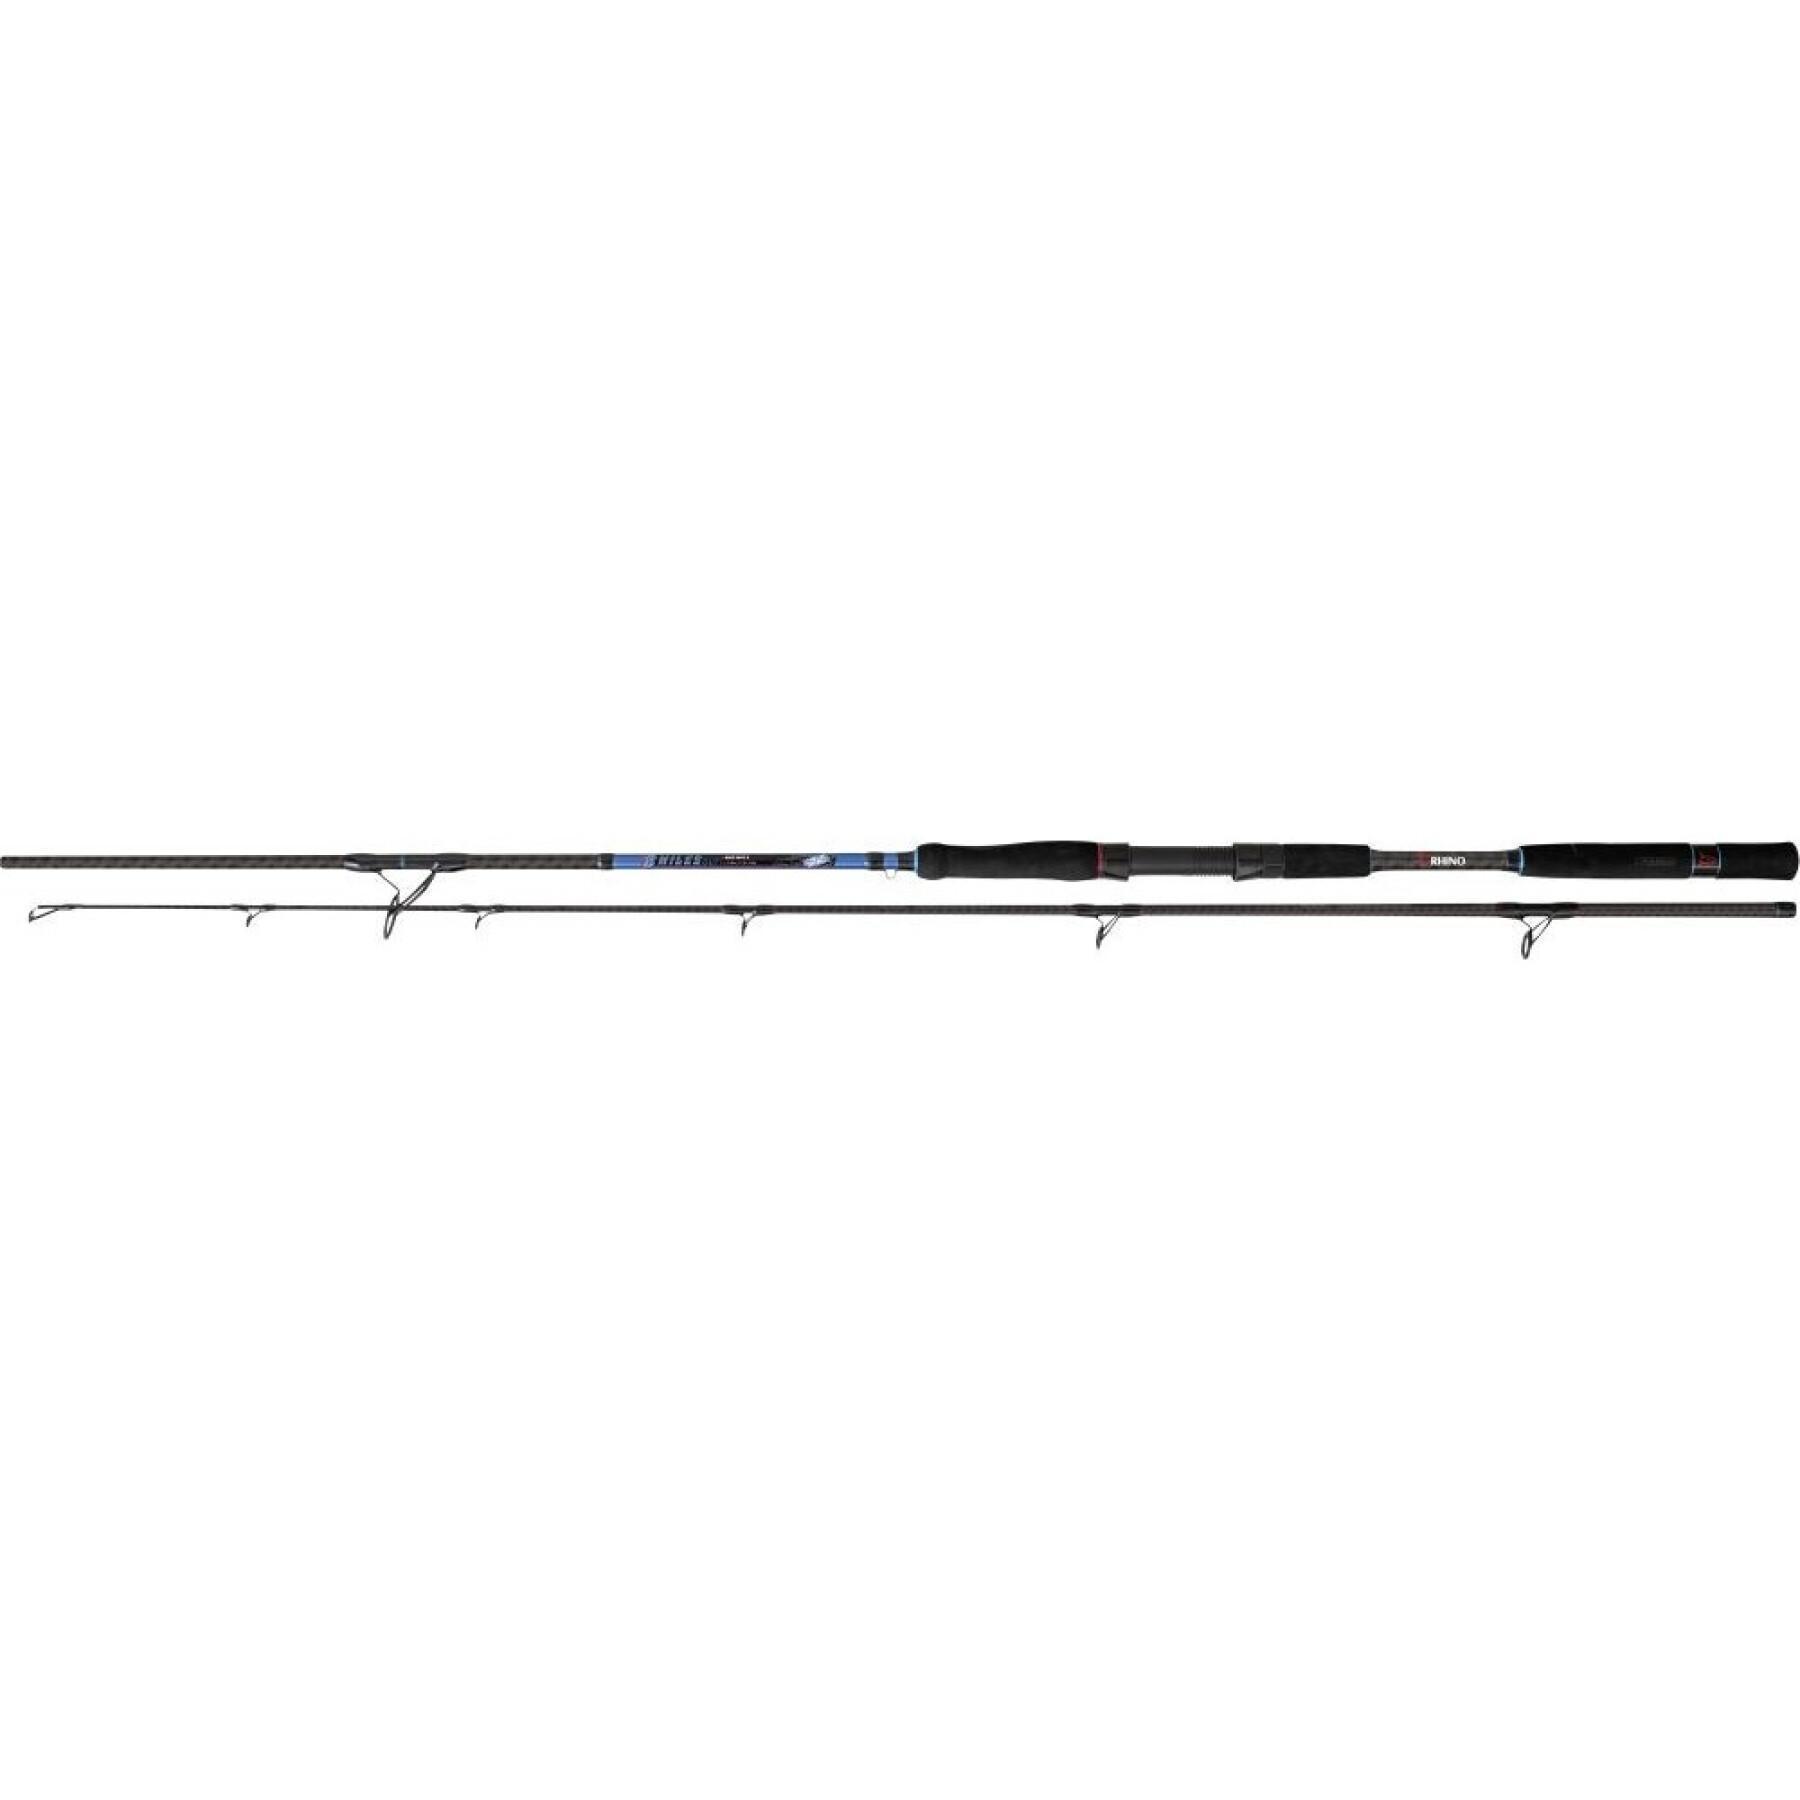 Cane Rhino 8 Miles Out Boat Cast H 220g